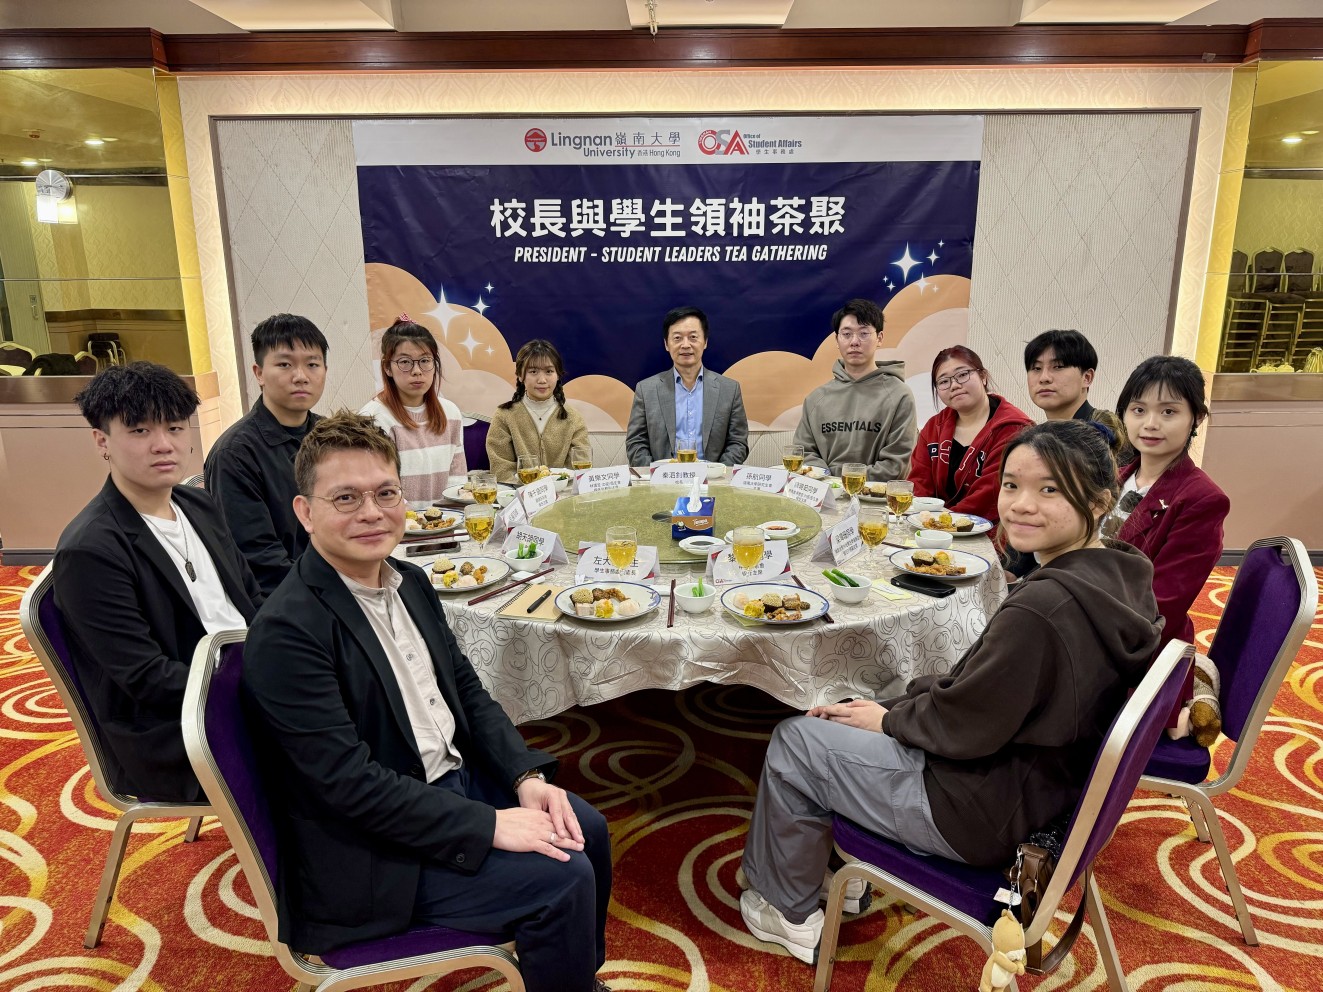 Tea together enables conversations between Lingnan President and student leaders